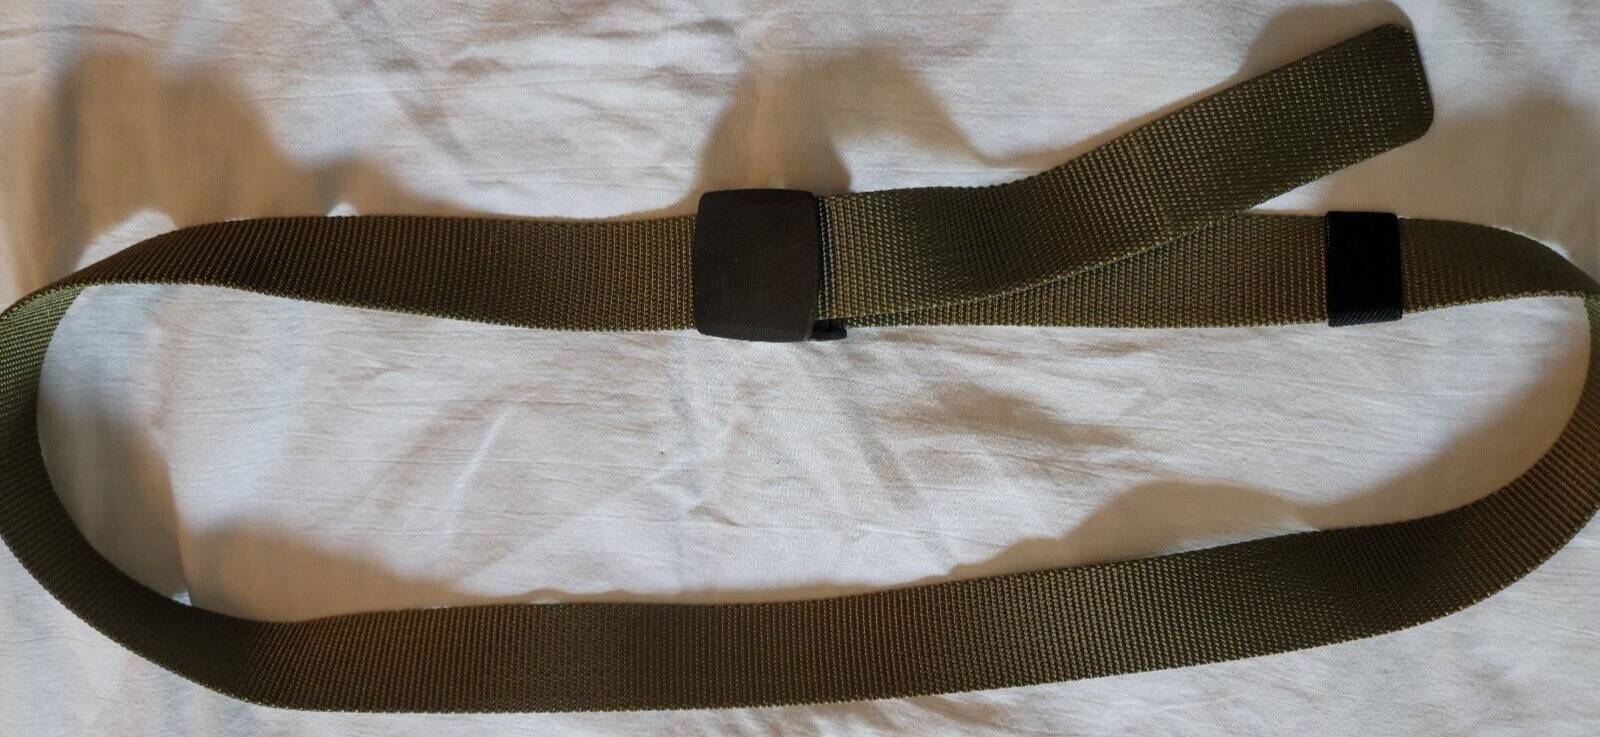 Military tactical belt with plastic buckle